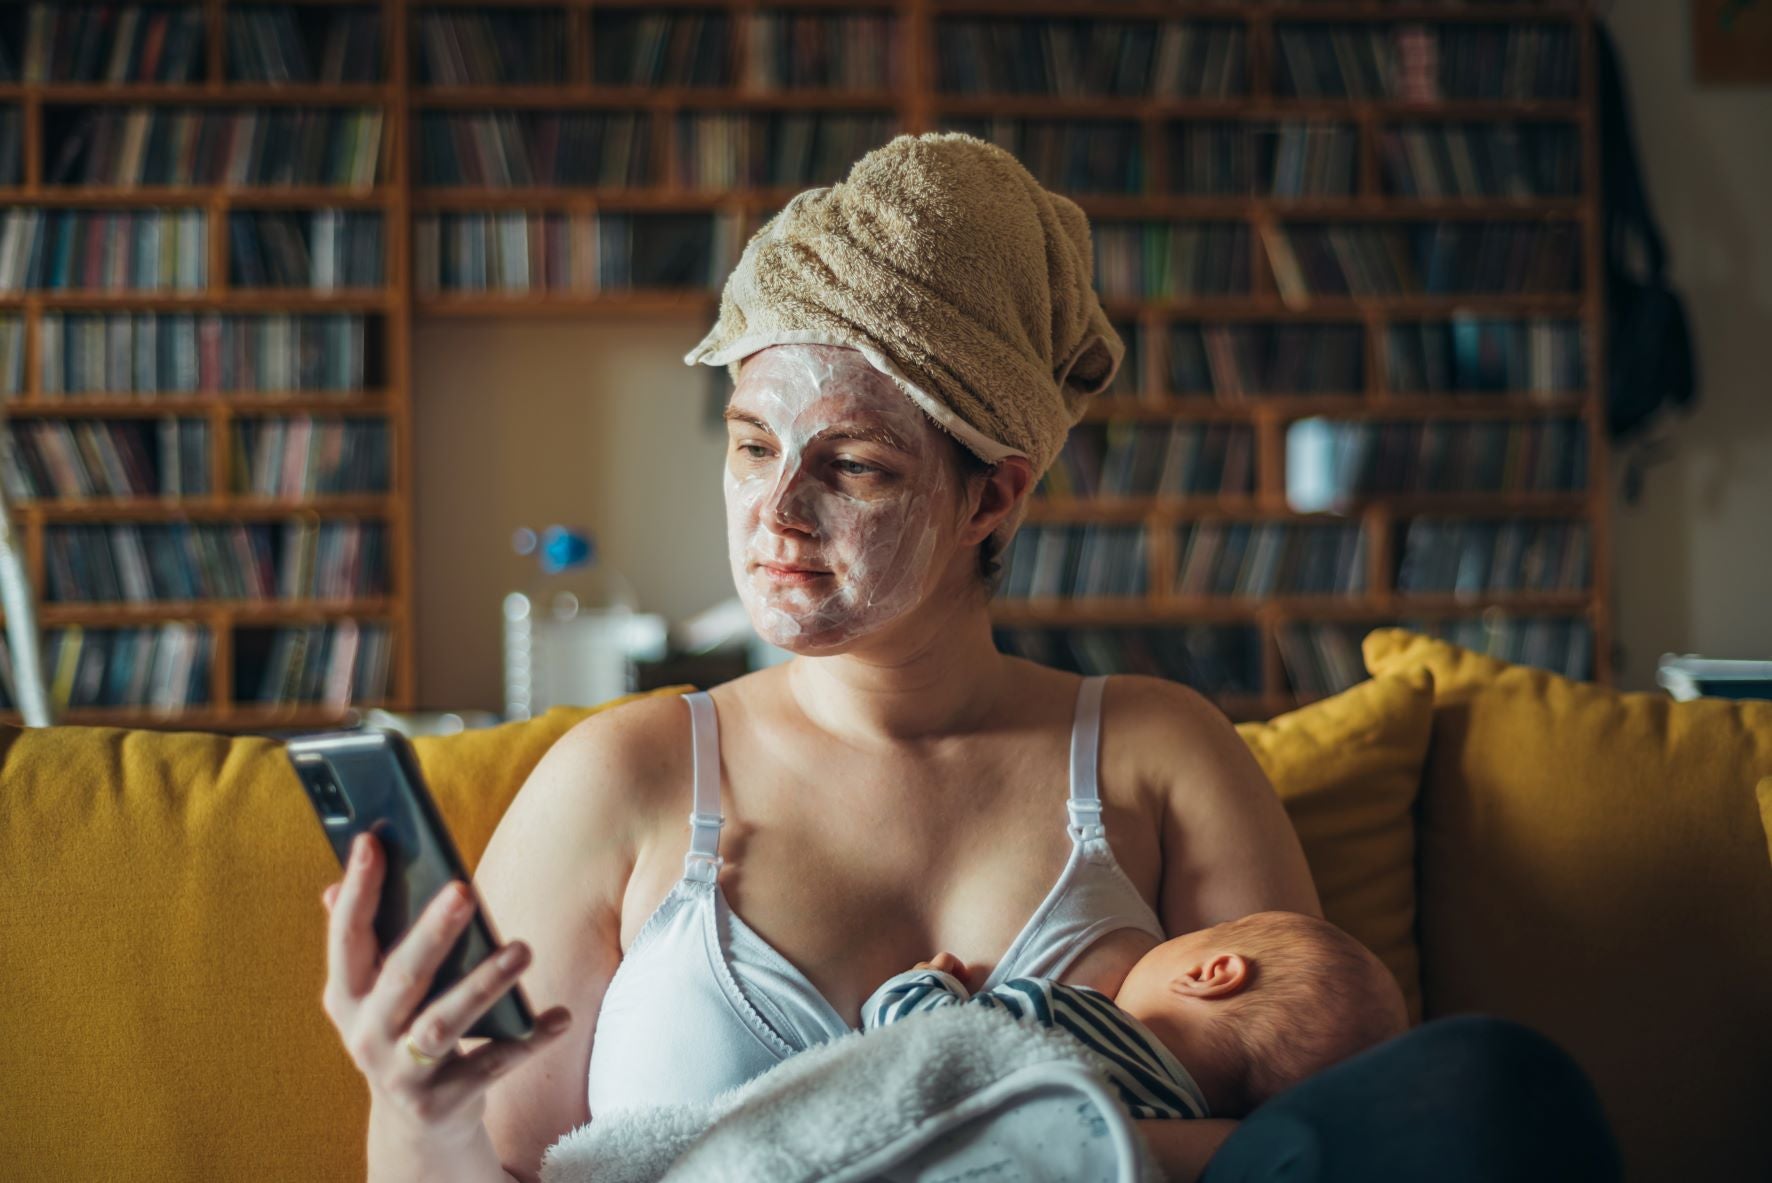 A mother wearing a face mask and hair towel while breastfeeding her baby and scrolling on her smartphone. Concept of being kind to yourself and allowing yourself to make mistakes as a first-time parent.